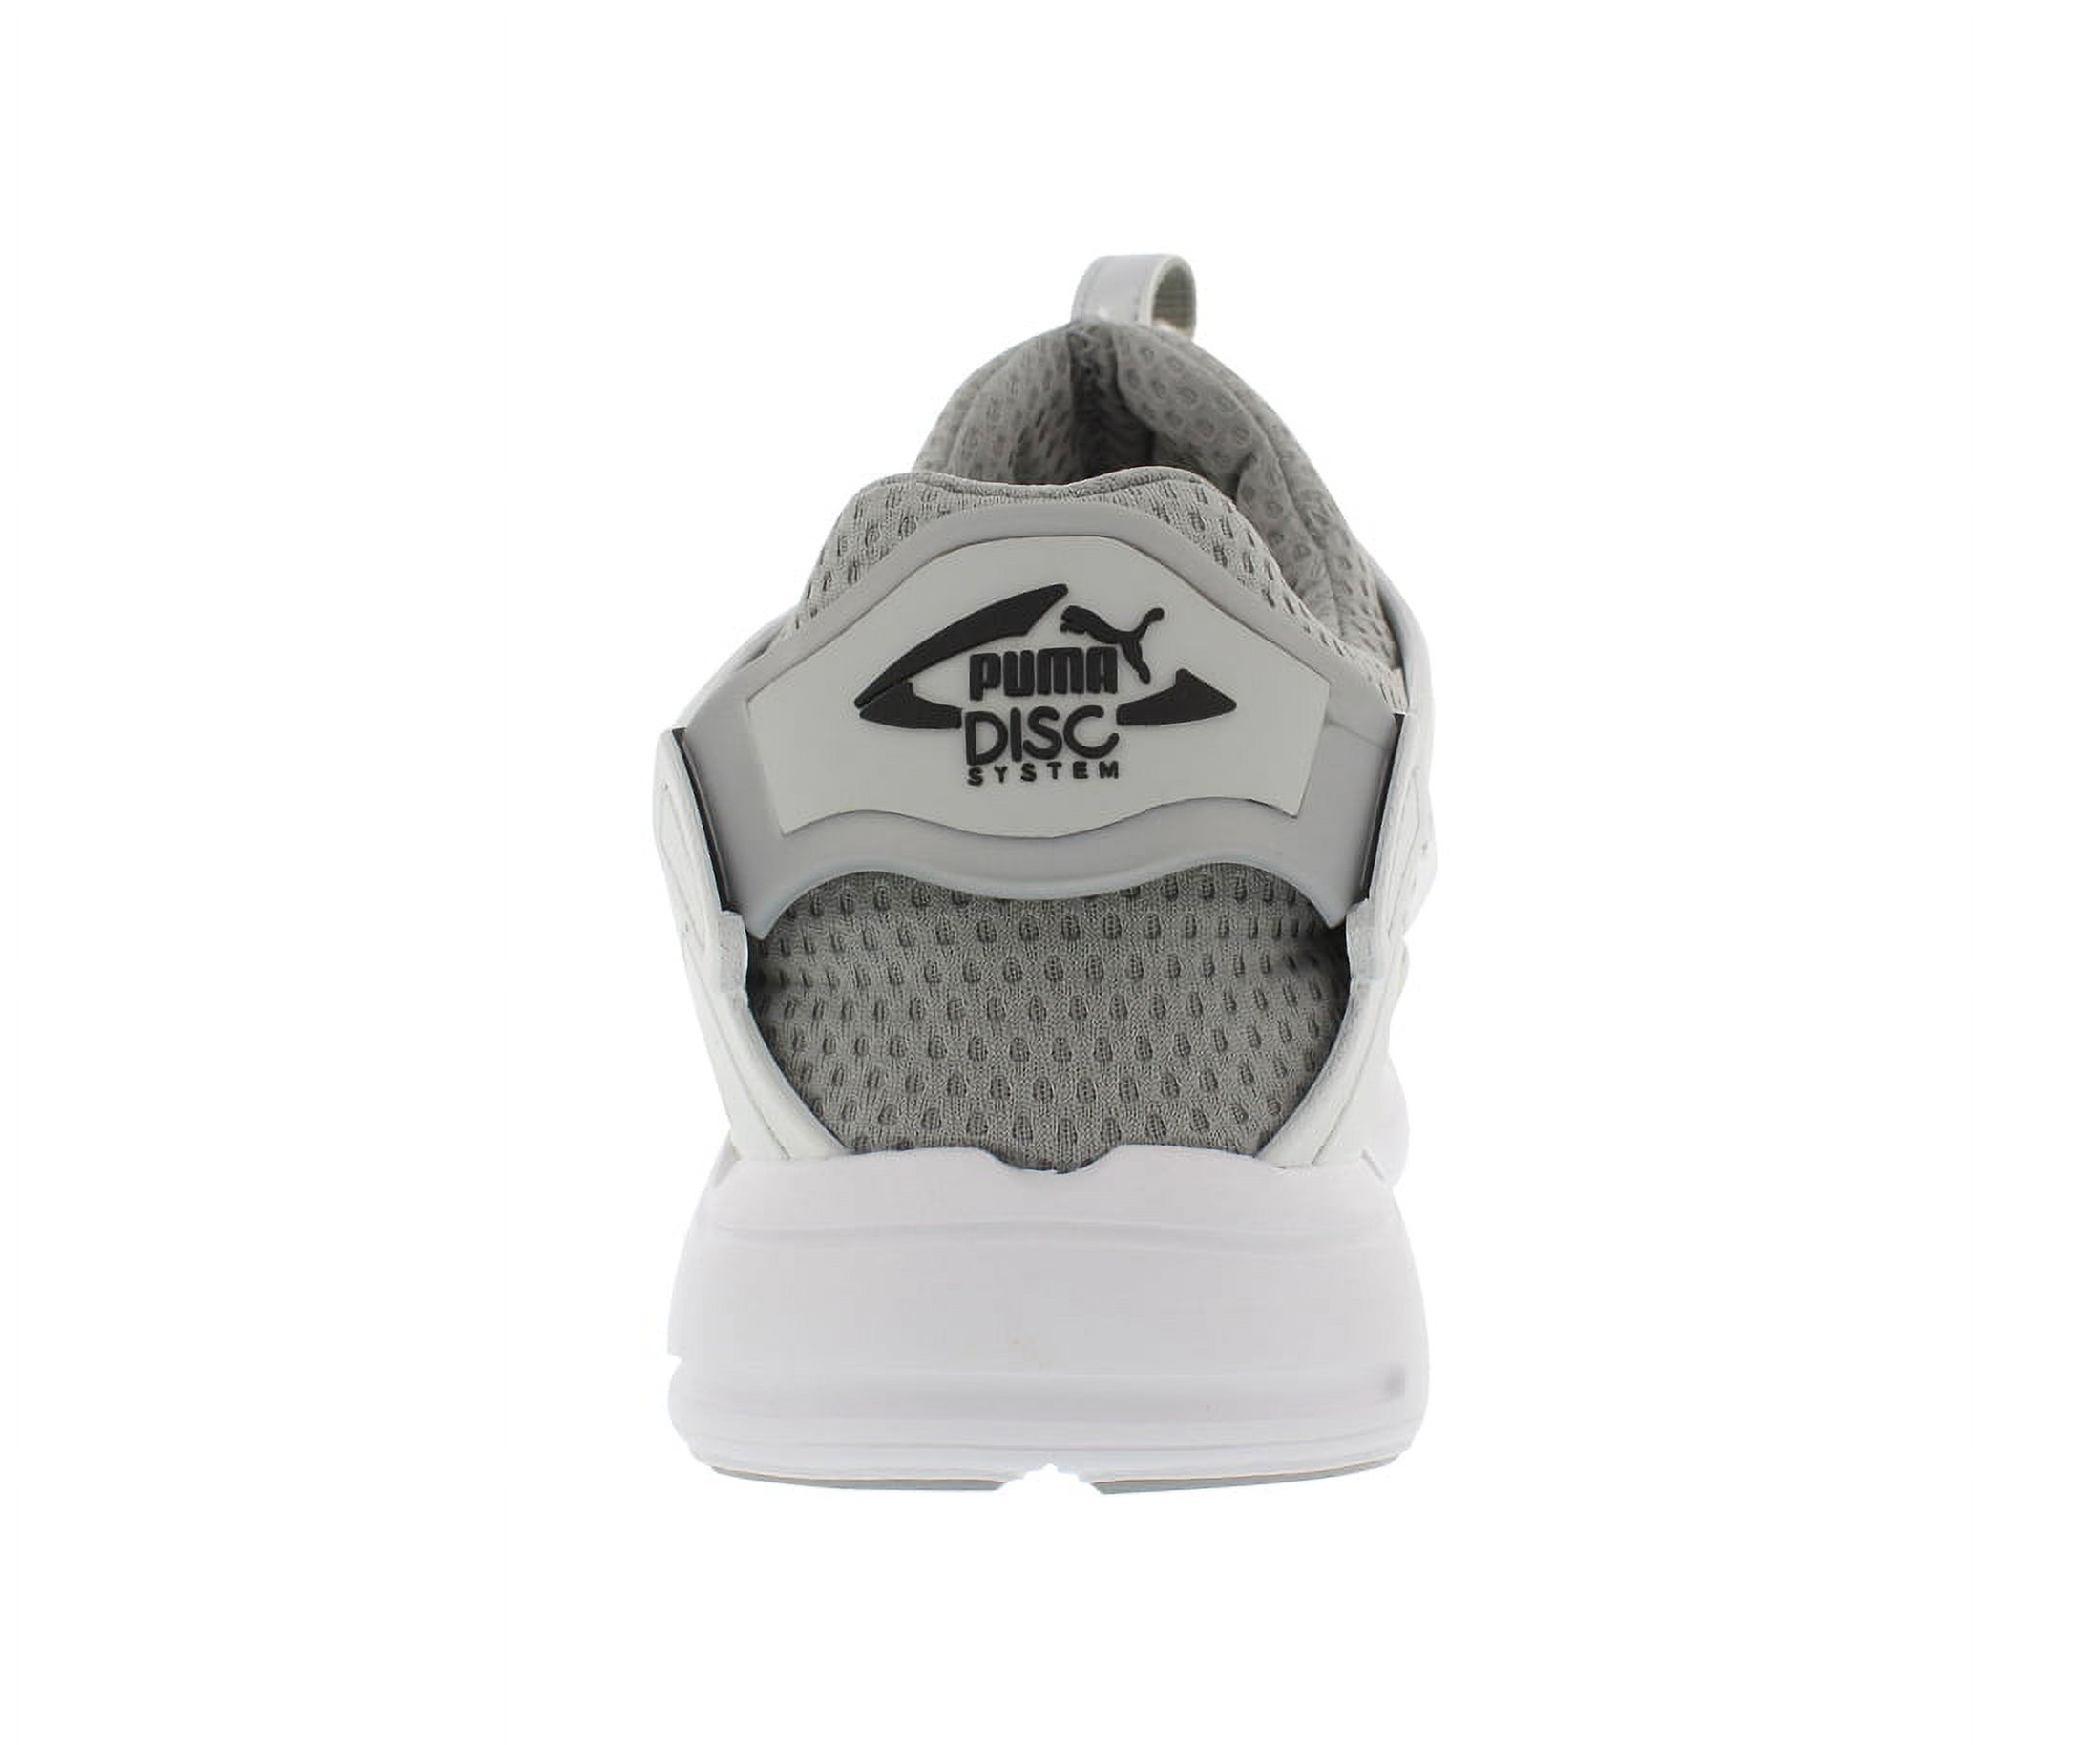 Puma Future Disc Lt Opulence Men's Athletic Slip On Shoes Sneakers, Grey - image 4 of 4